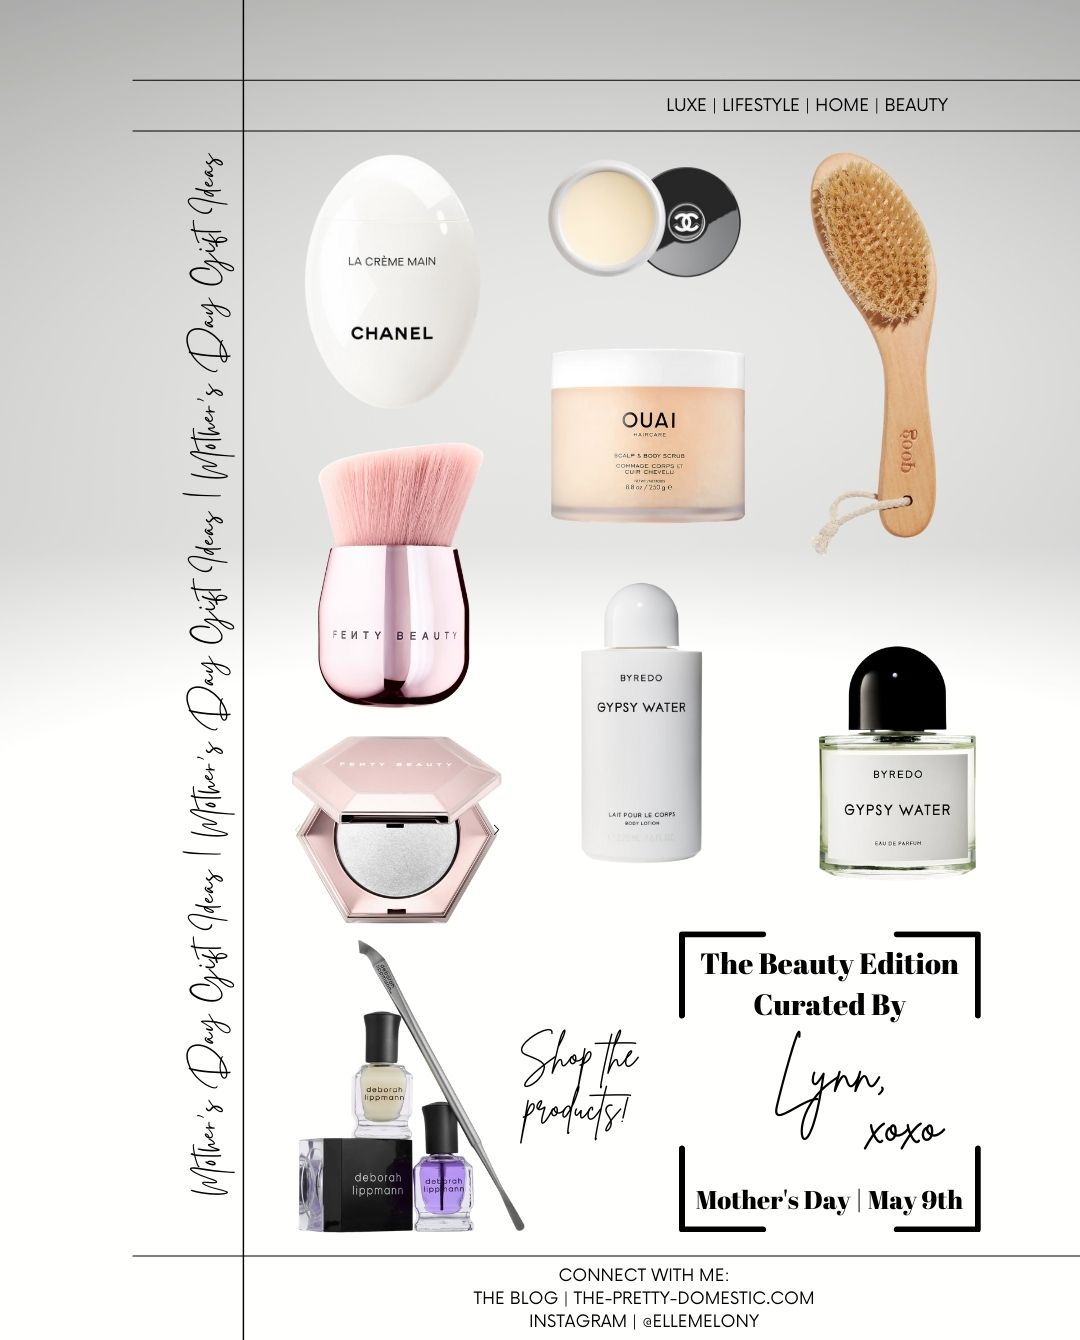 Mother's Day Beauty Gift Ideas - The Beauty Look Book